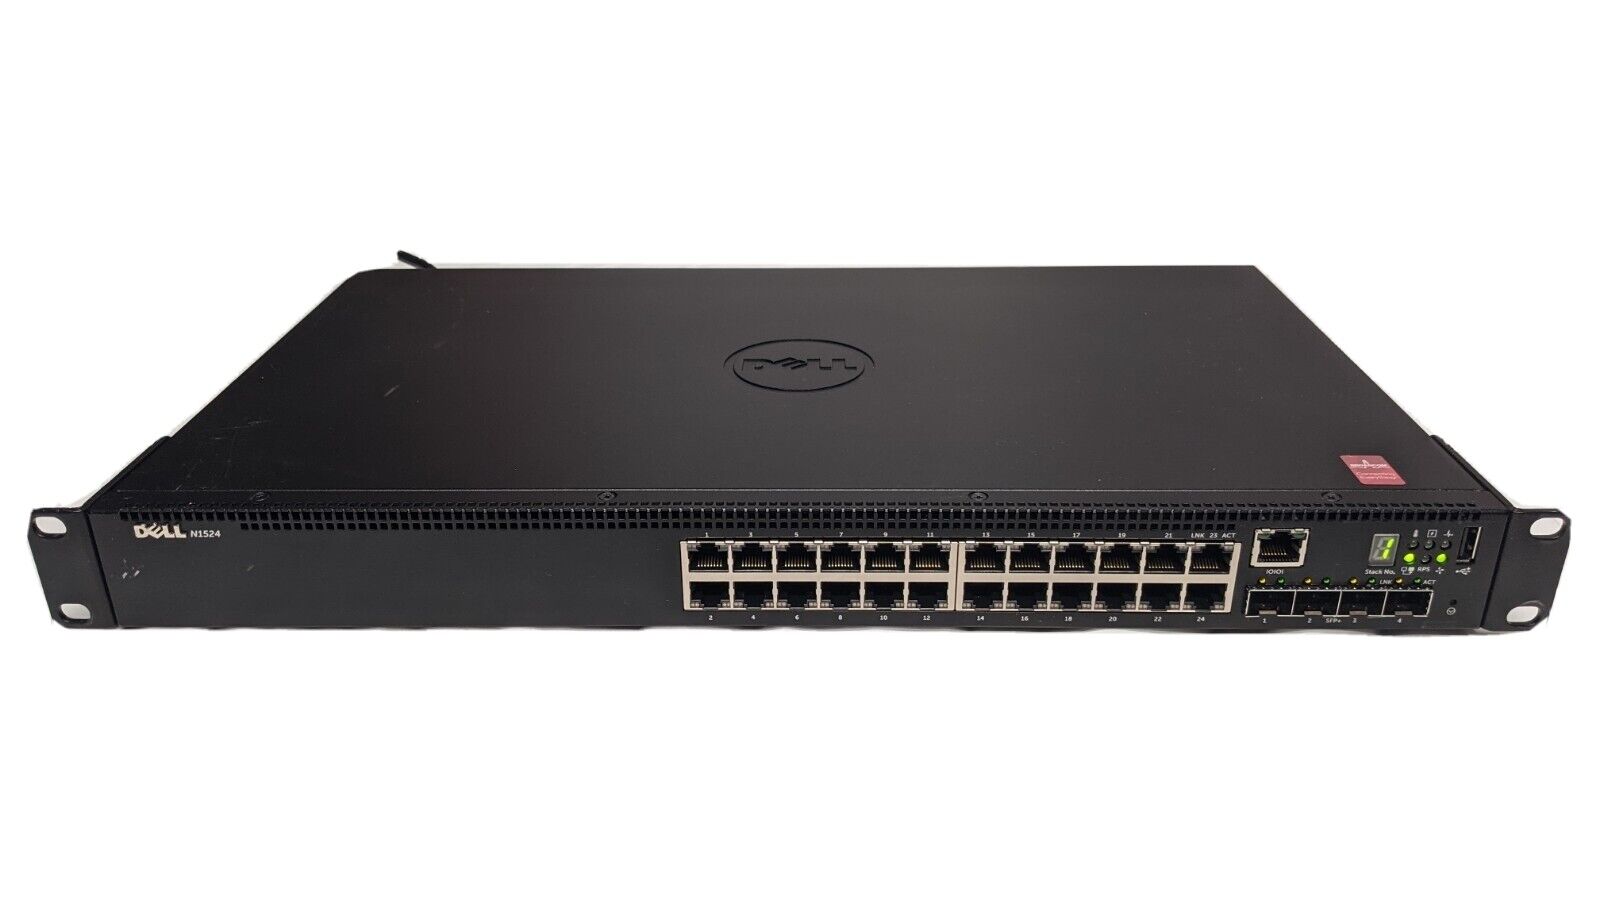 Dell Networking N1524 24 port Gigabit 4-Port 10GbE SFP+ Managed Switch